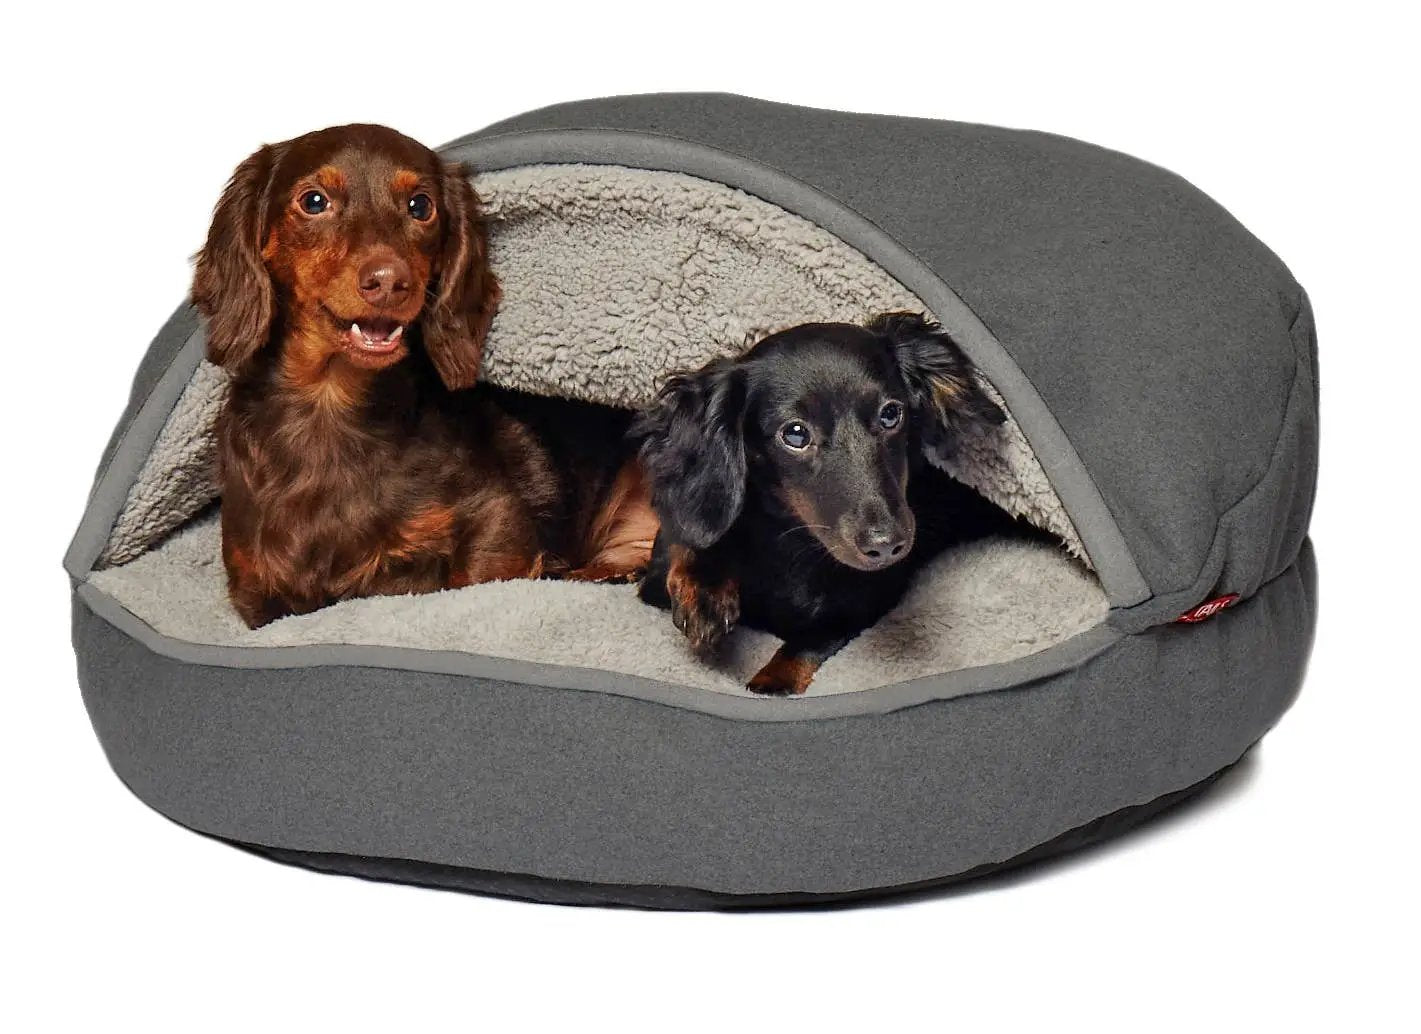 Precious Tails Precious Tails Plush Felt Sherpa Lined Cave Hooded Pet Bed